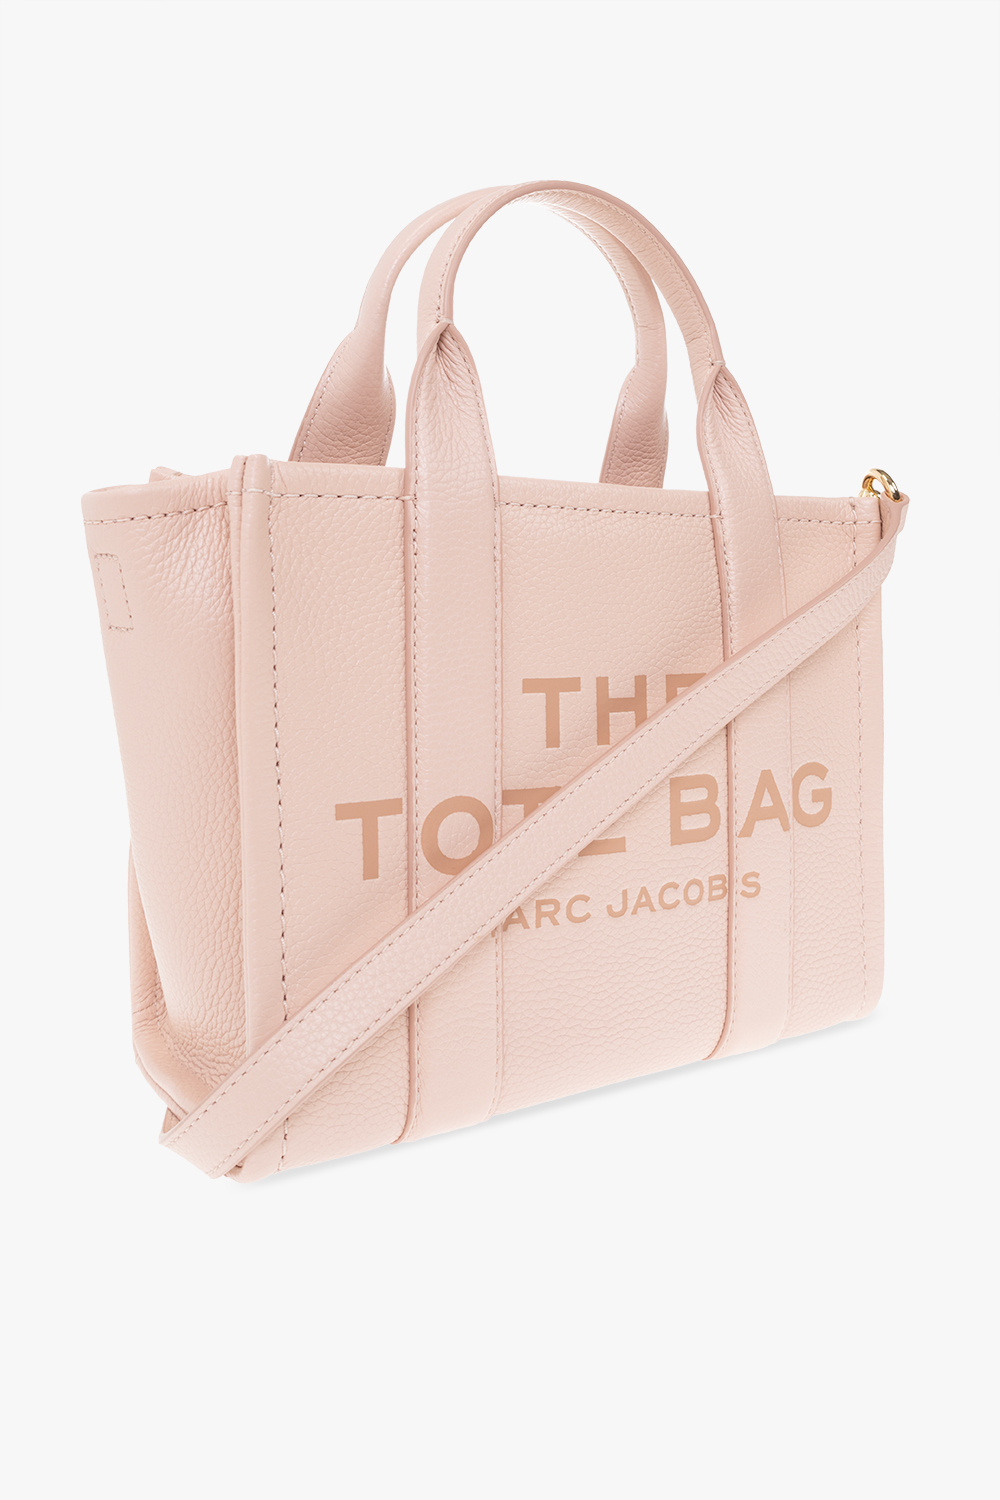 Marc Jacobs The Snapshot Small Tie-dye Camera Bag - Pink 'The Tote